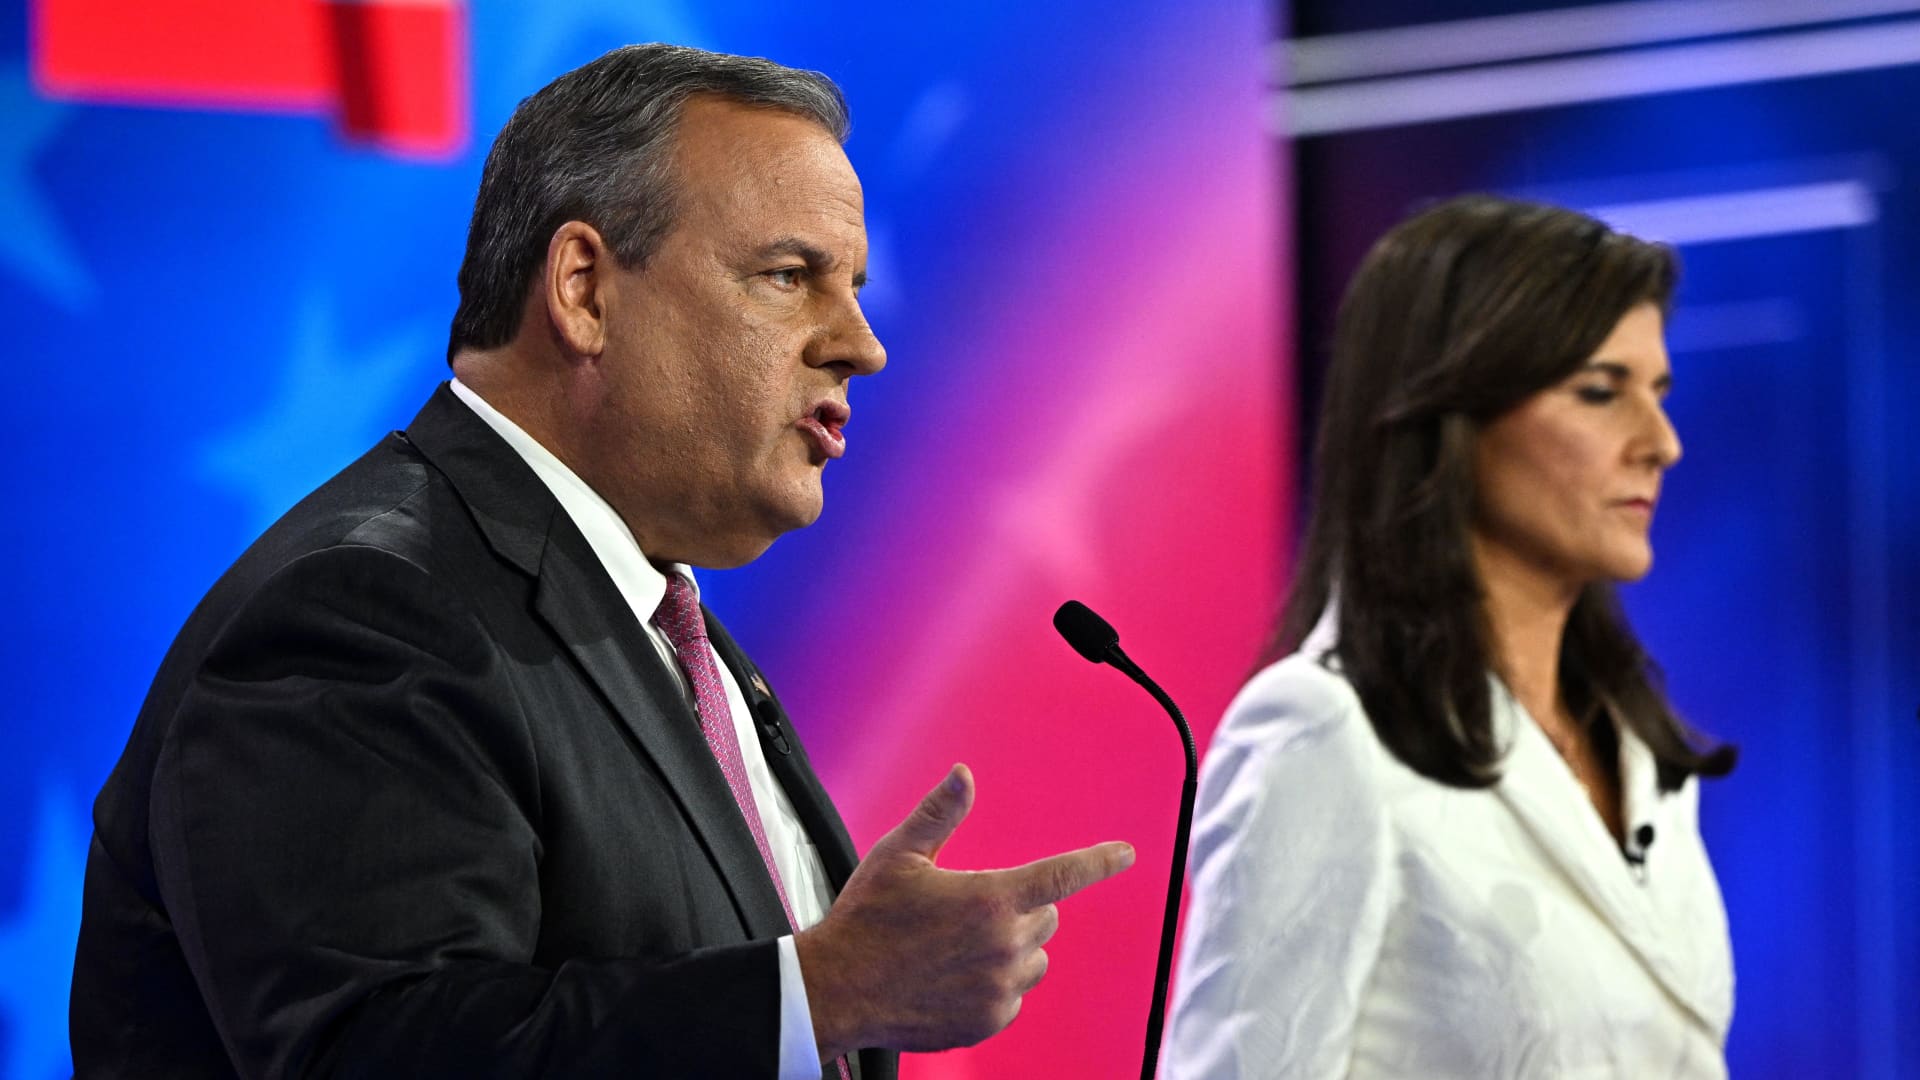 Former Governor of New Jersey Chris Christie (L) speaks alongside former Governor from South Carolina and UN ambassador Nikki Haley during the third Republican presidential primary debate at the Knight Concert Hall at the Adrienne Arsht Center for the Performing Arts in Miami, Florida, on November 8, 2023.